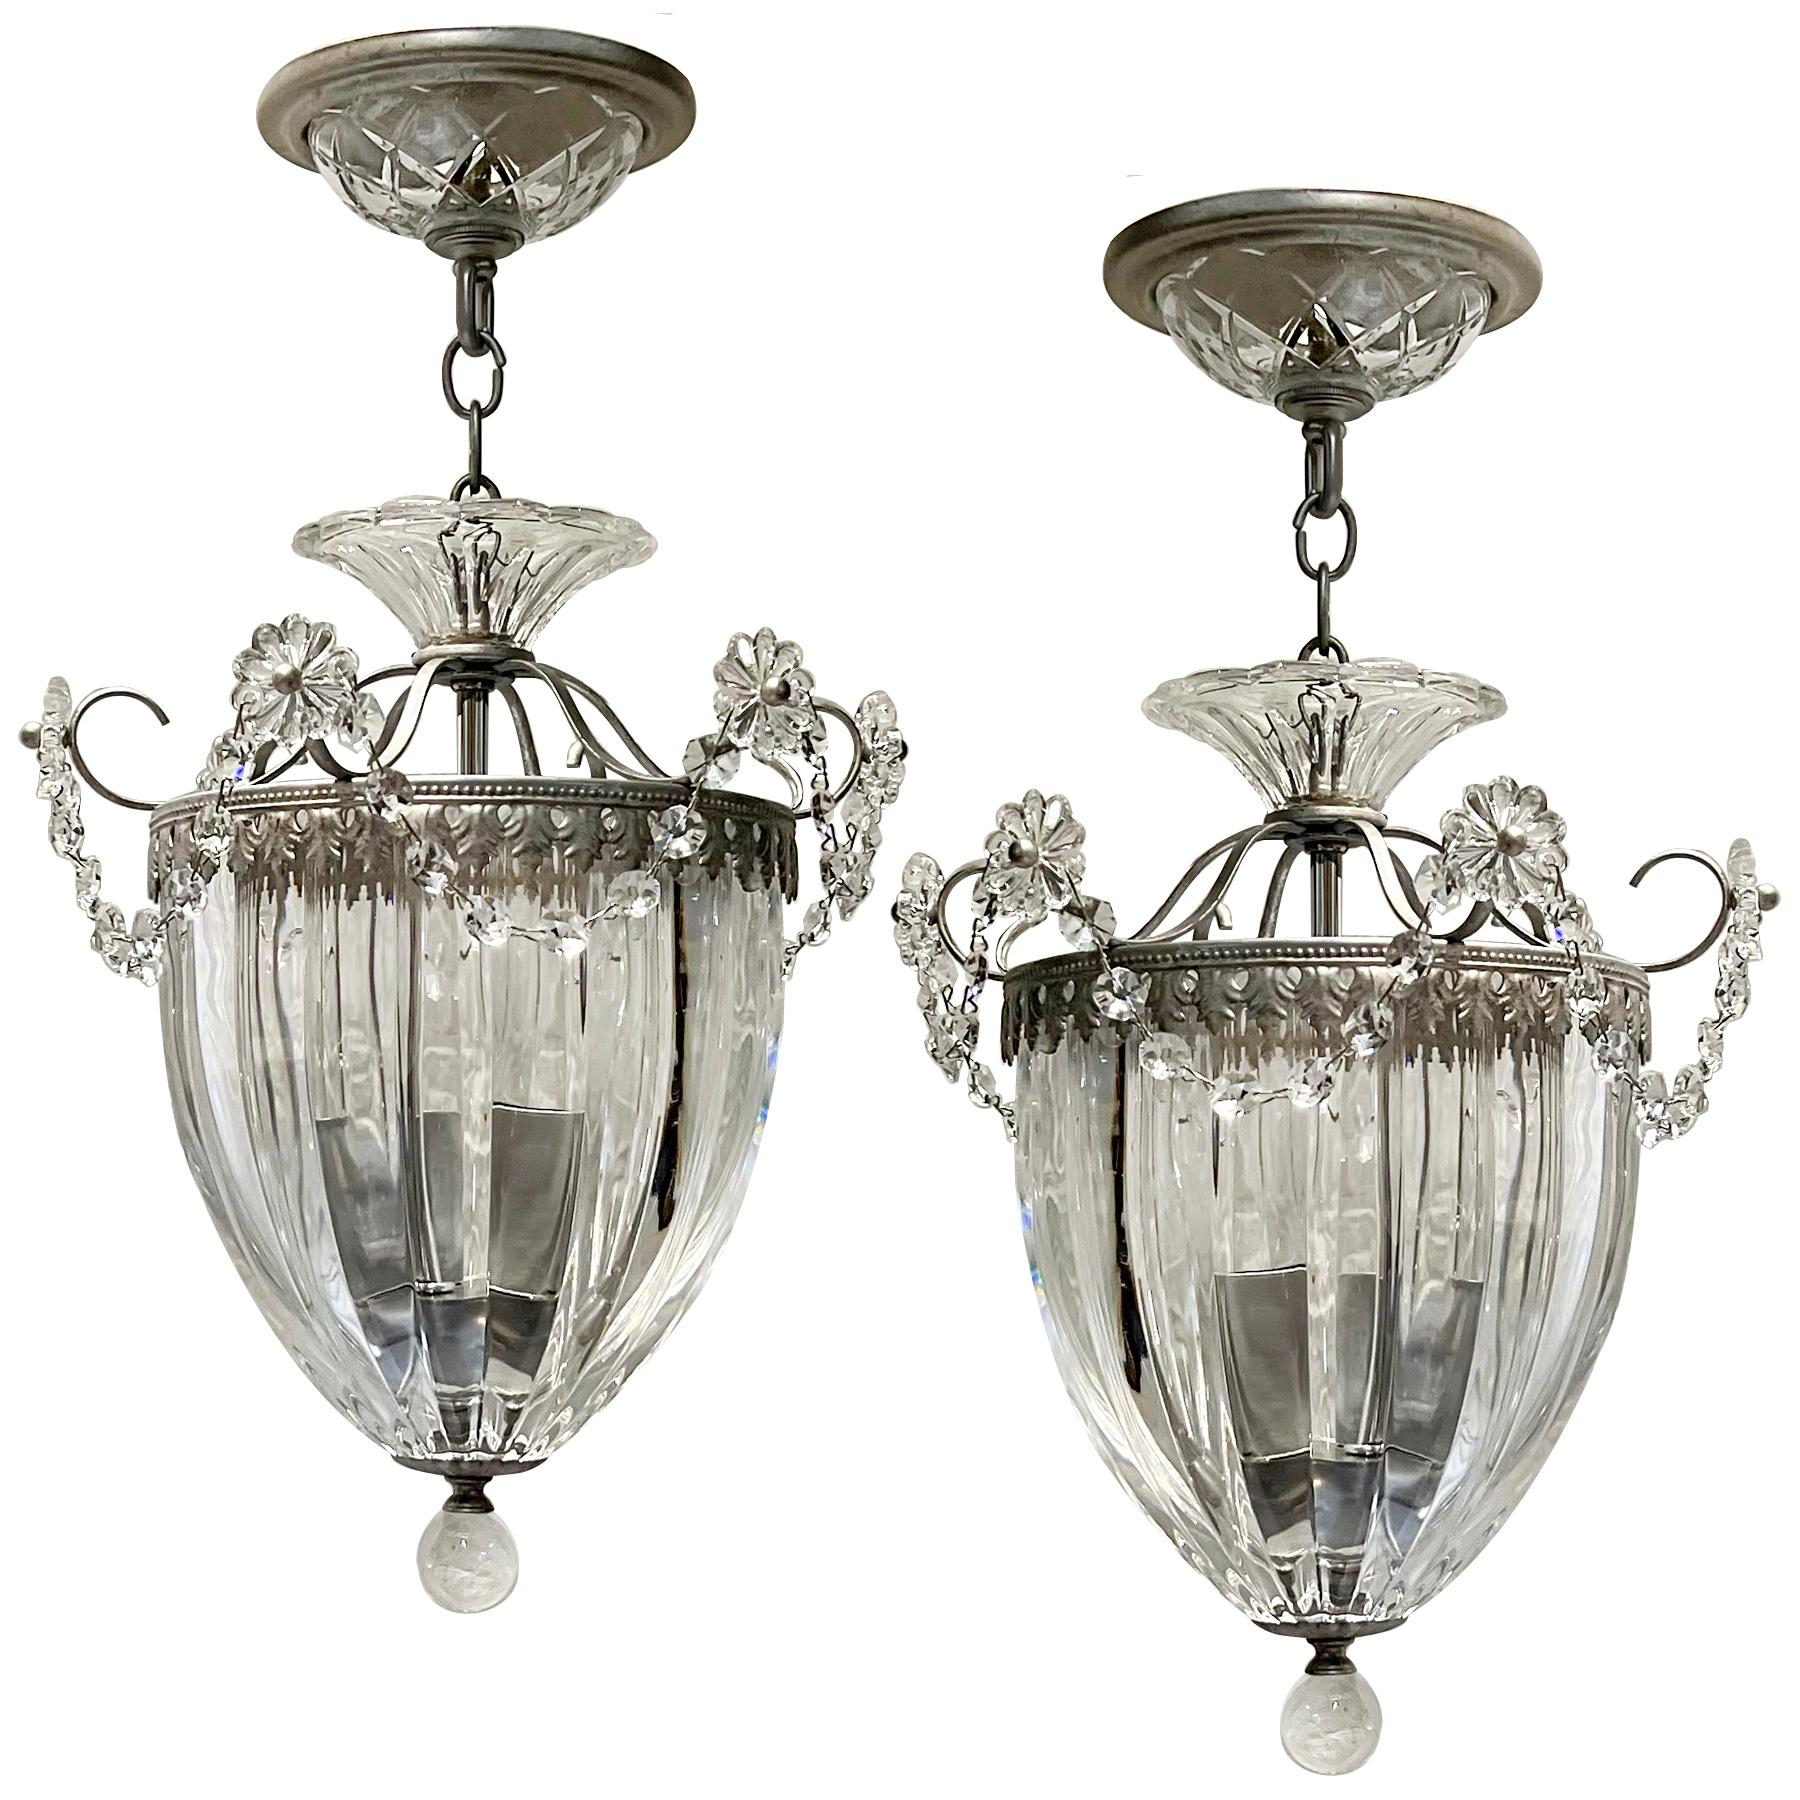 Pair of 1960's French crystal lanterns with 3 candelabra interior lights.

Measurements:
Present drop: 19